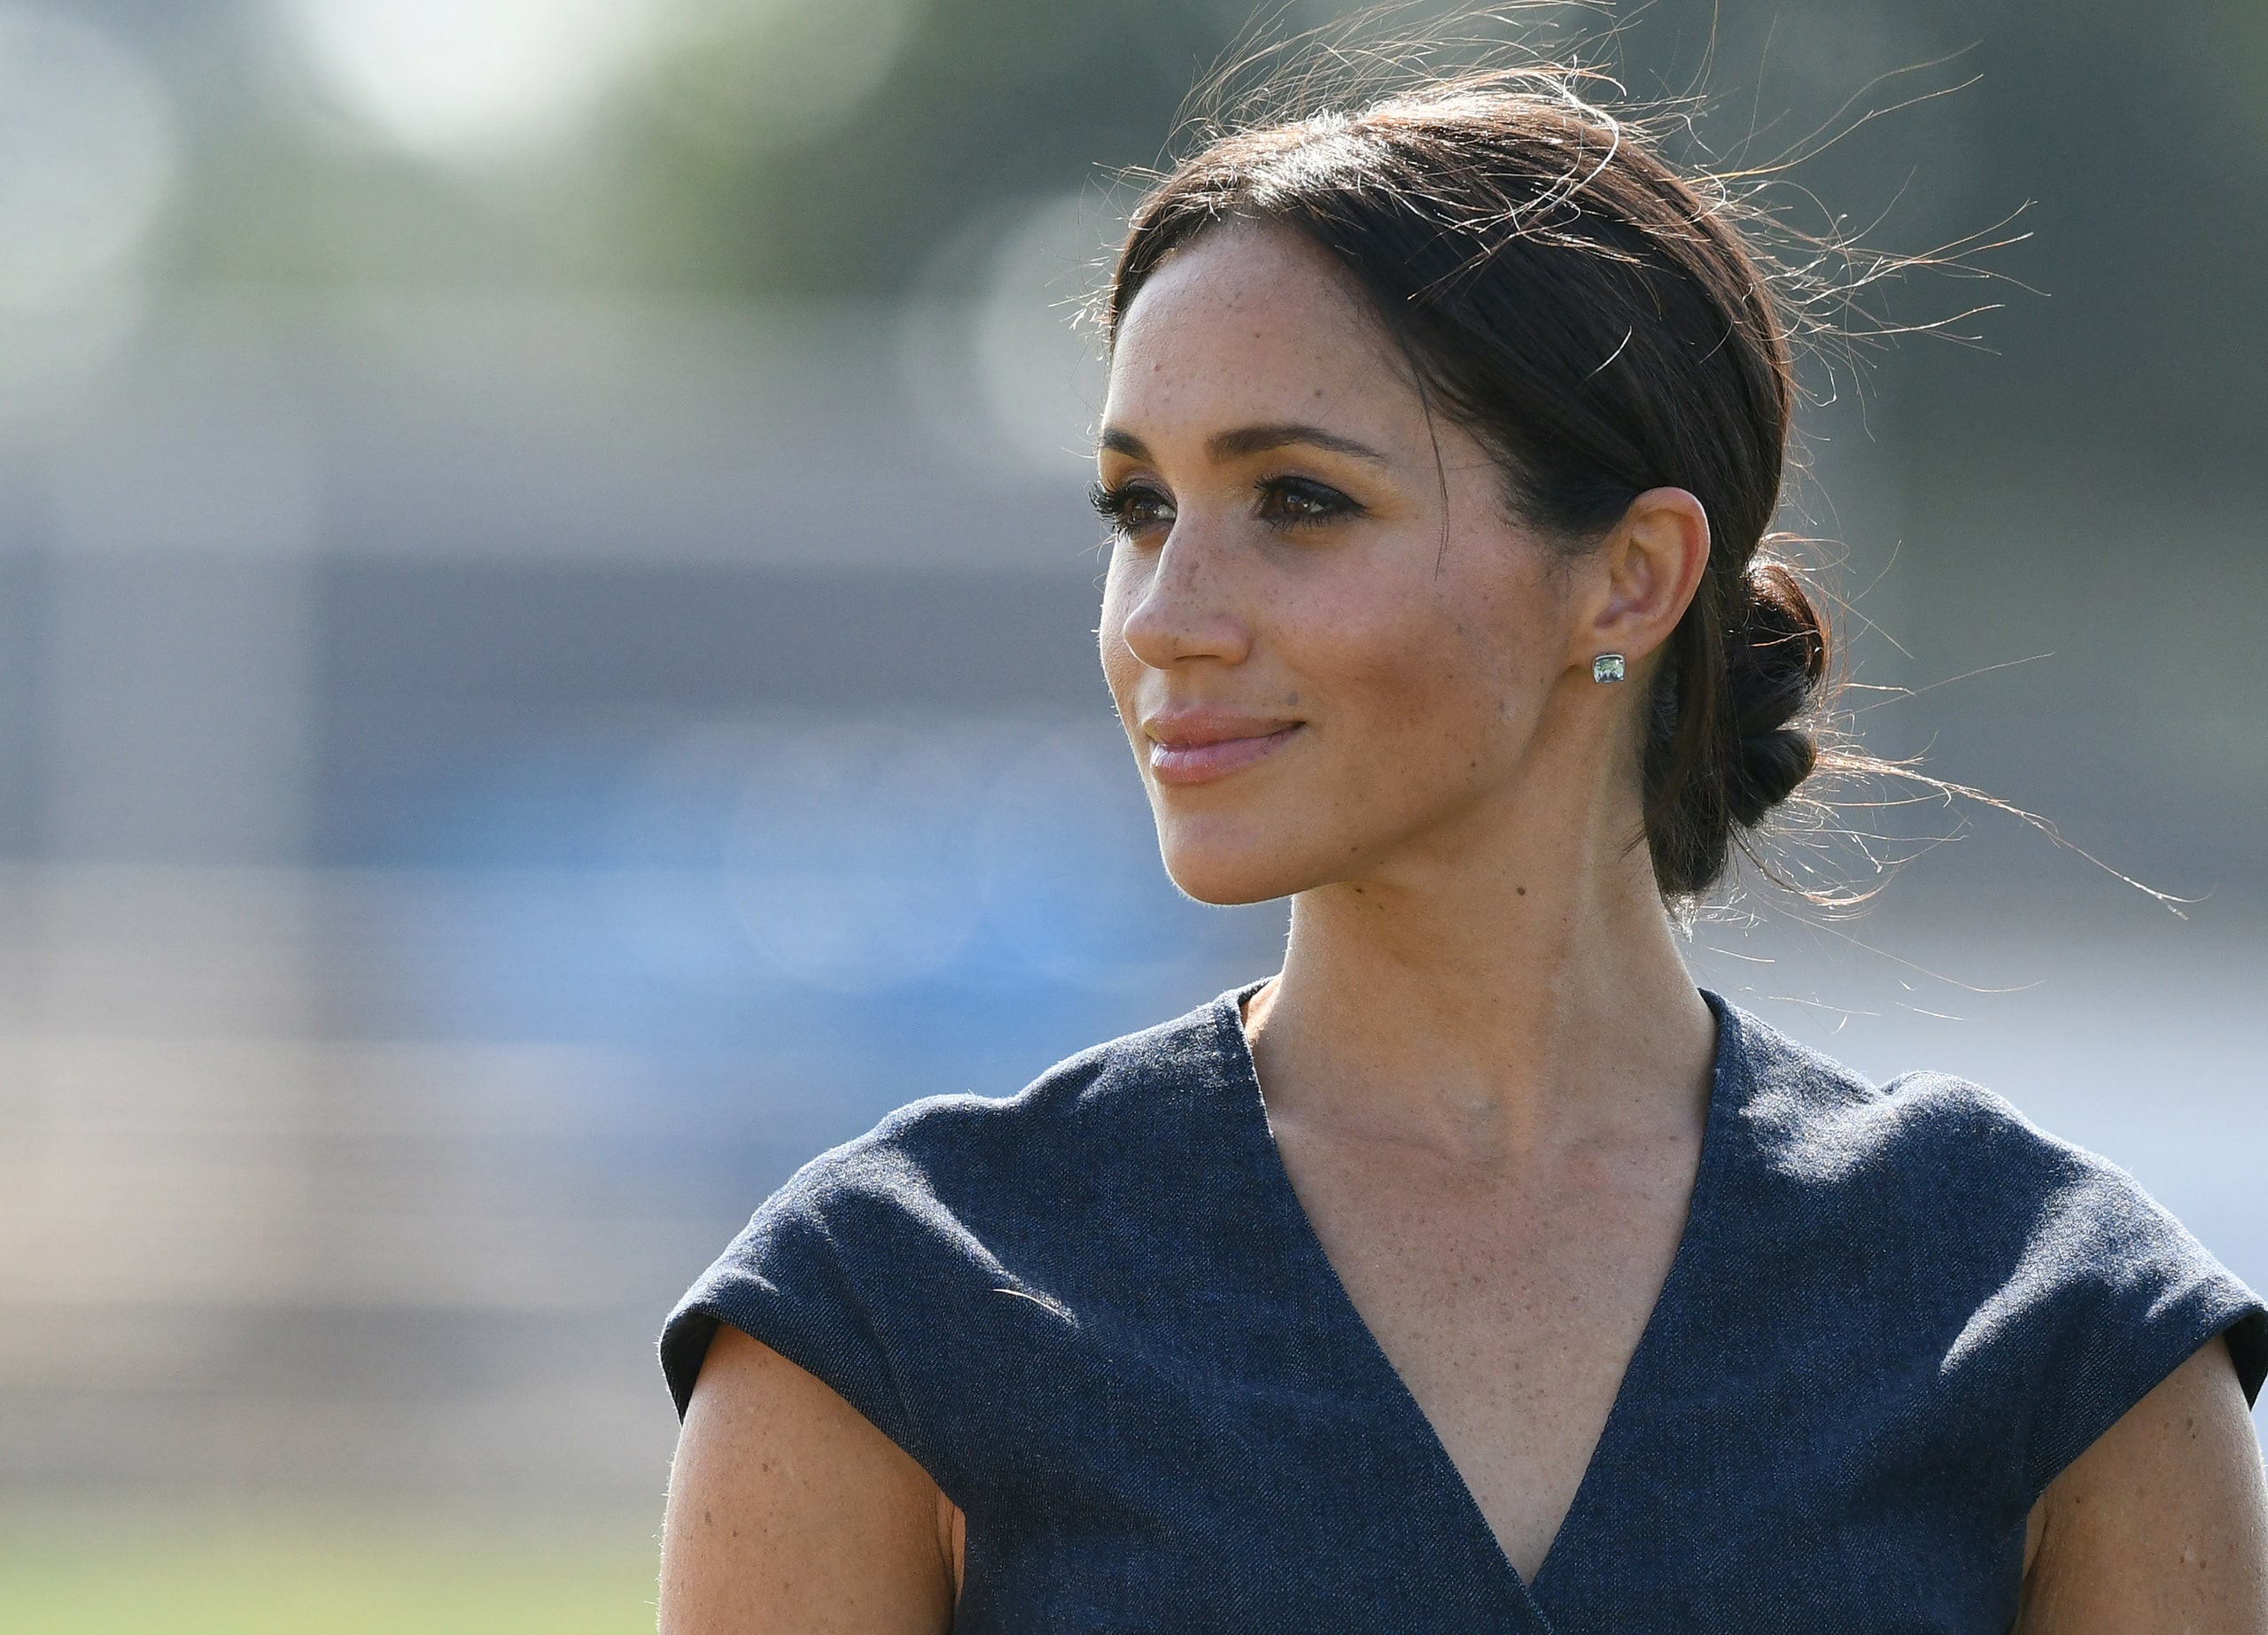 Meghan Markle, Simone Biles, Britney Spears are featured in the 2021 TIME's 100 most influential people list